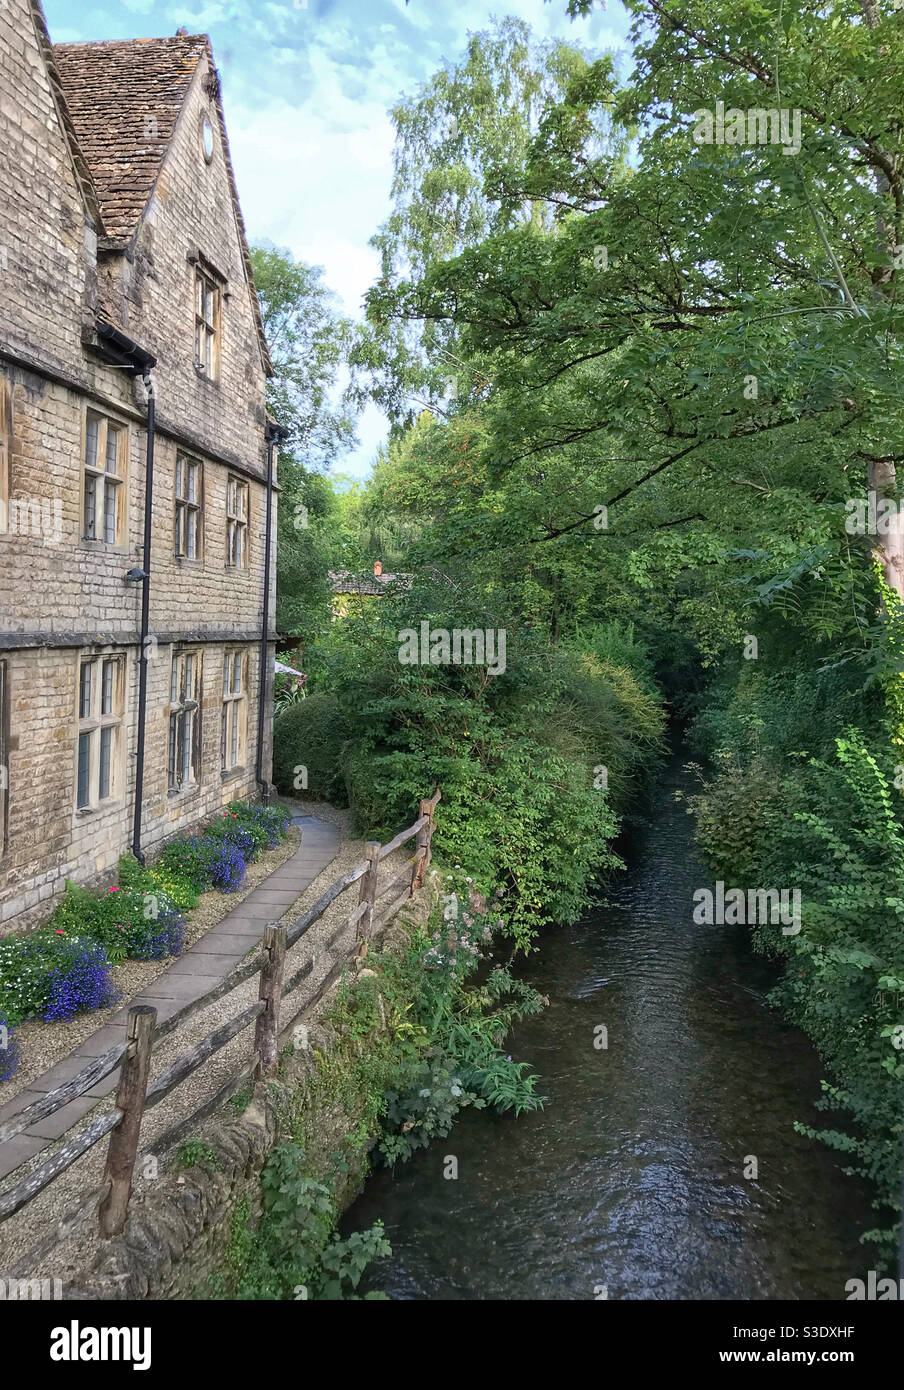 Egypt Mill Hotel and Restaurant, next to the stream, in Nailsworth. Near Stroud, Gloucestershire, England. Stock Photo